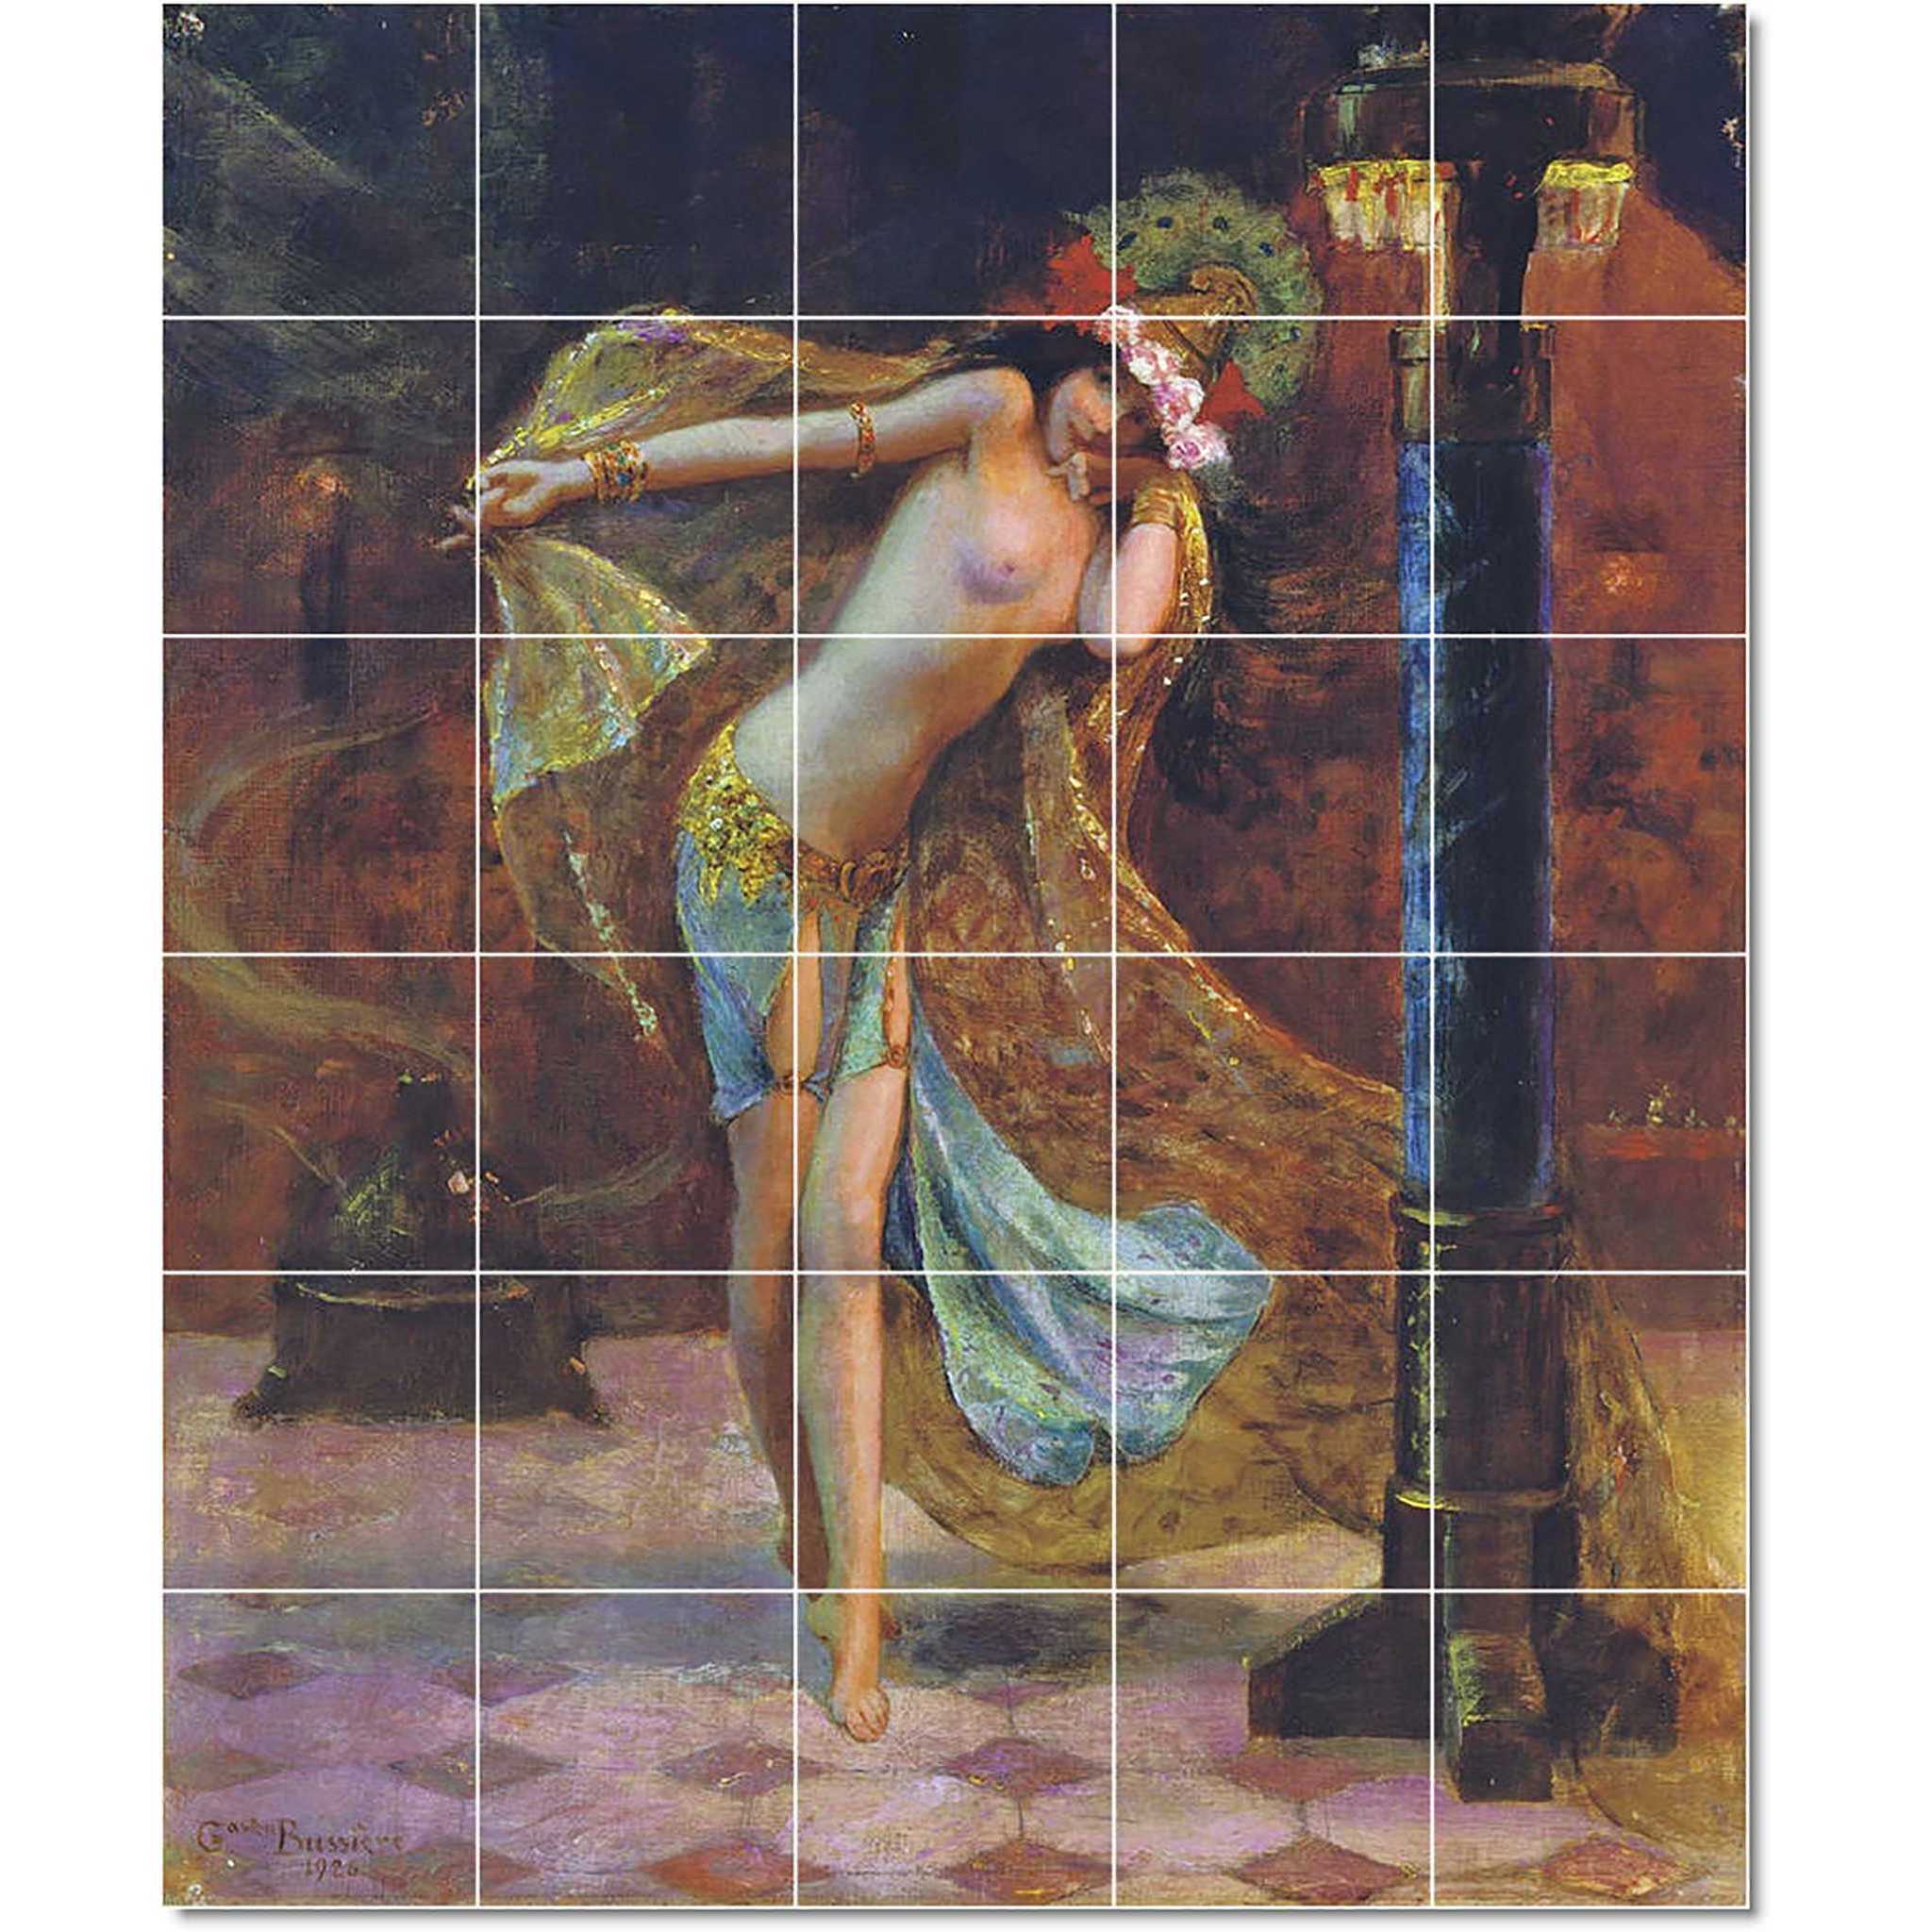 gaston bussiere nude painting ceramic tile mural p22162